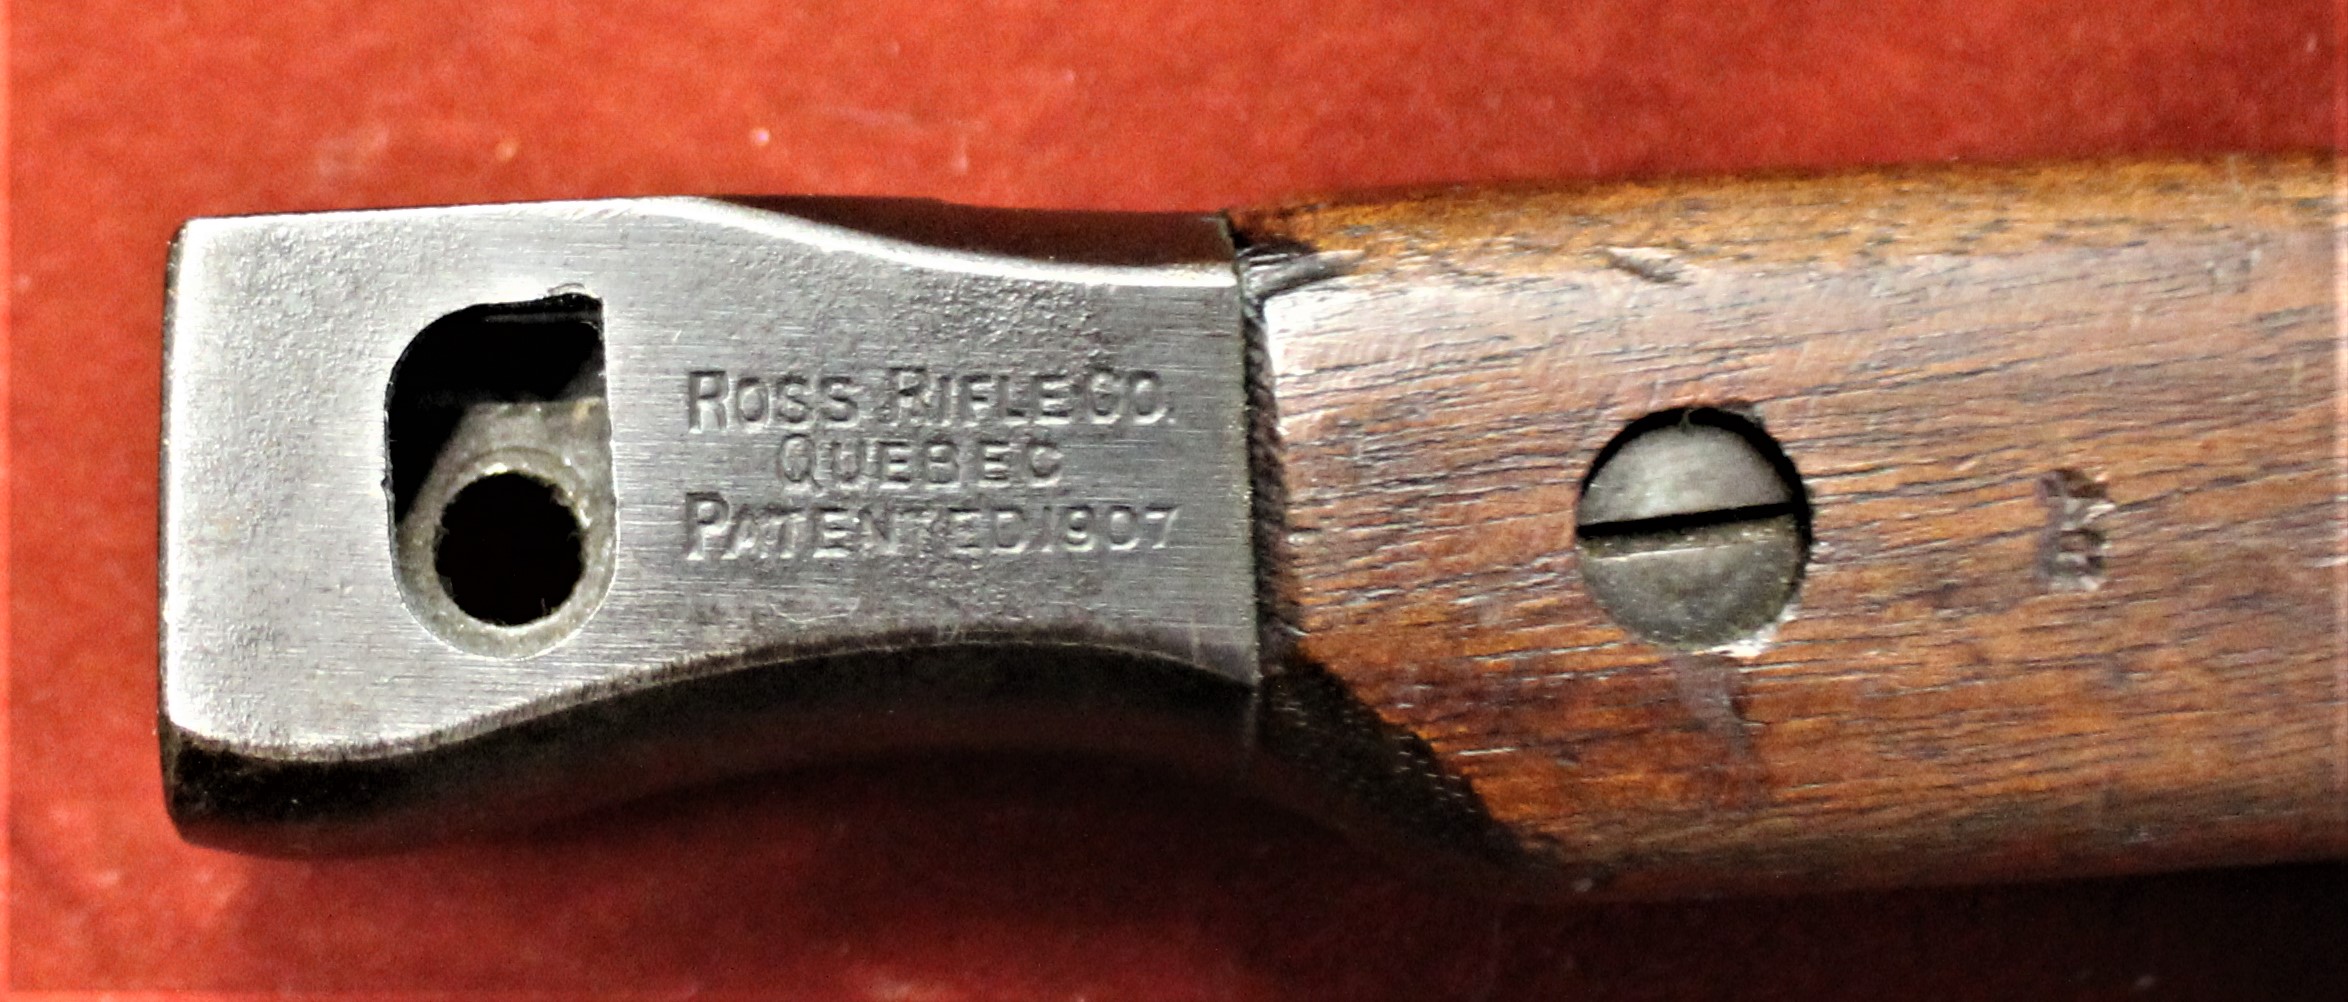 Canadian WWI MKII Ross Rifle Bayonet, made by Ross Rifle Co., Quebec 3/1916, with '11' acceptance - Image 3 of 3